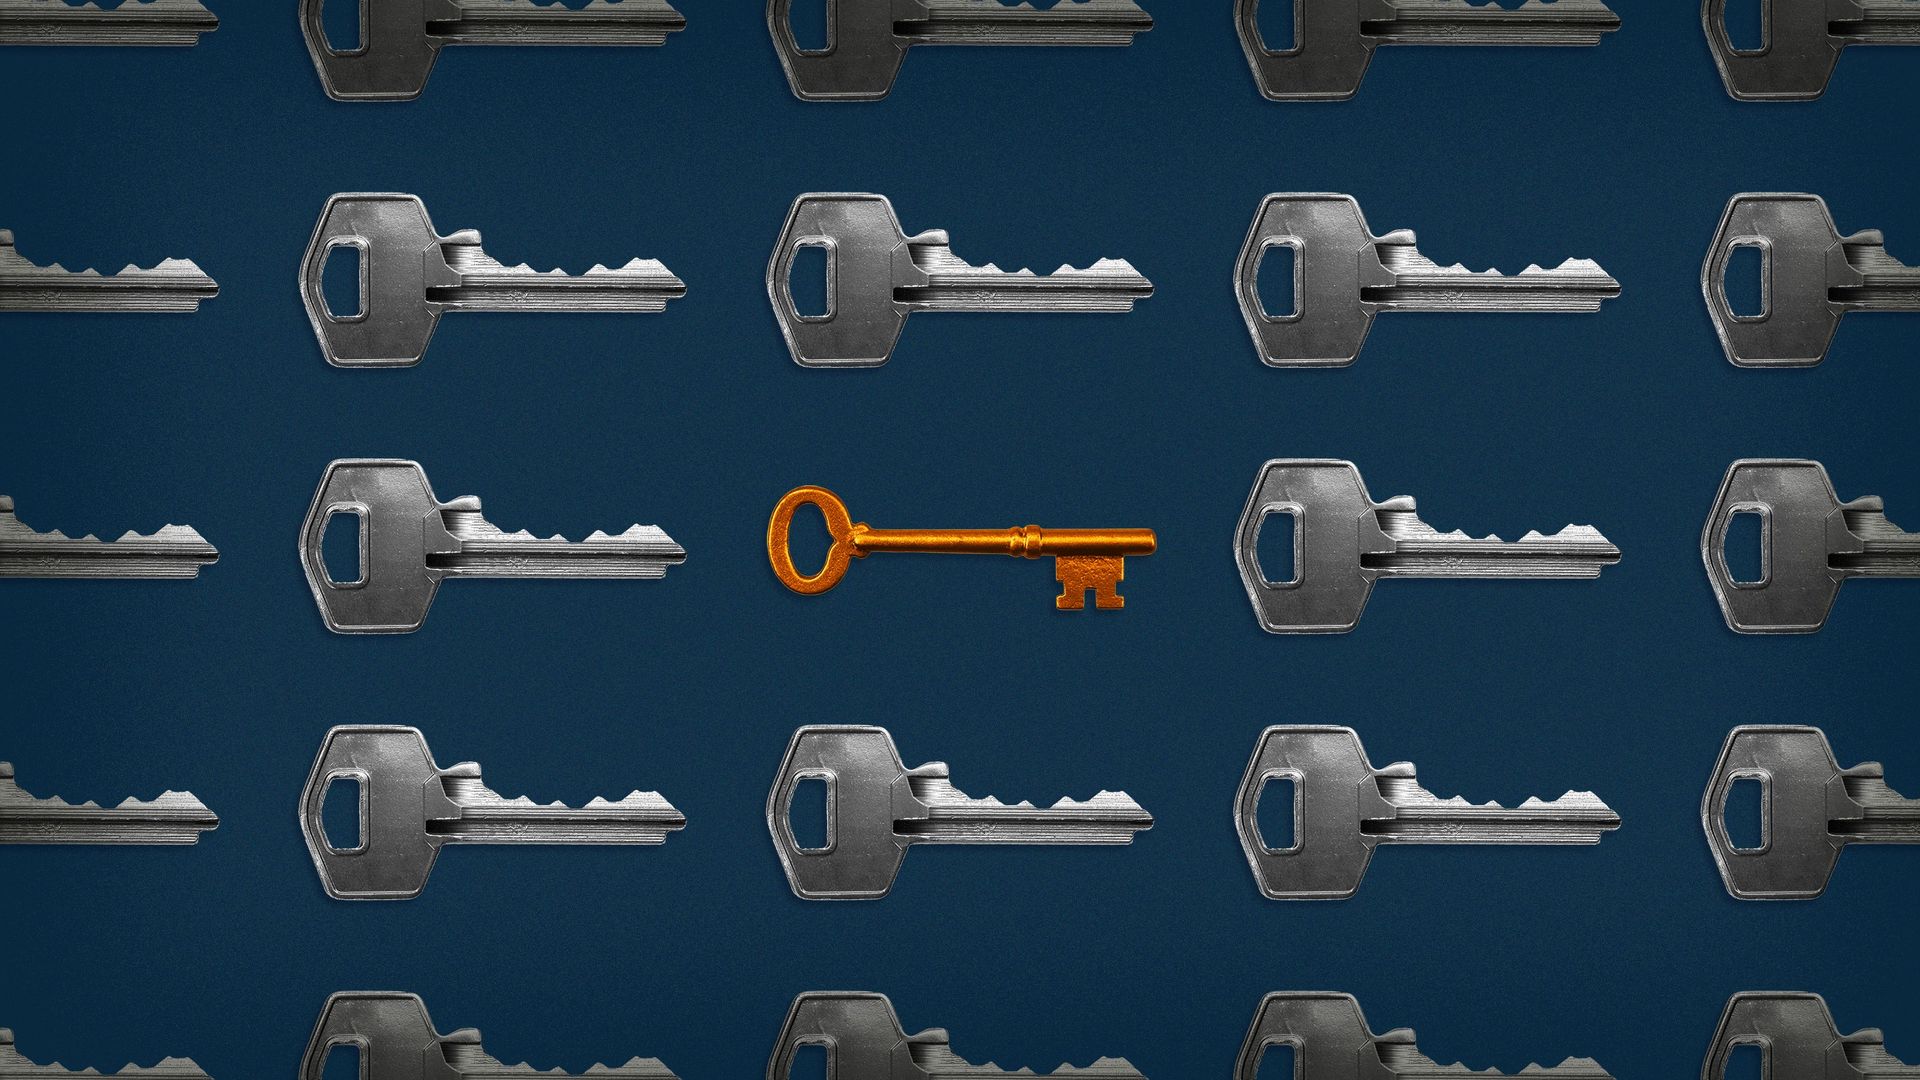 Illustration of one old fashioned key surrounded by newer keys.